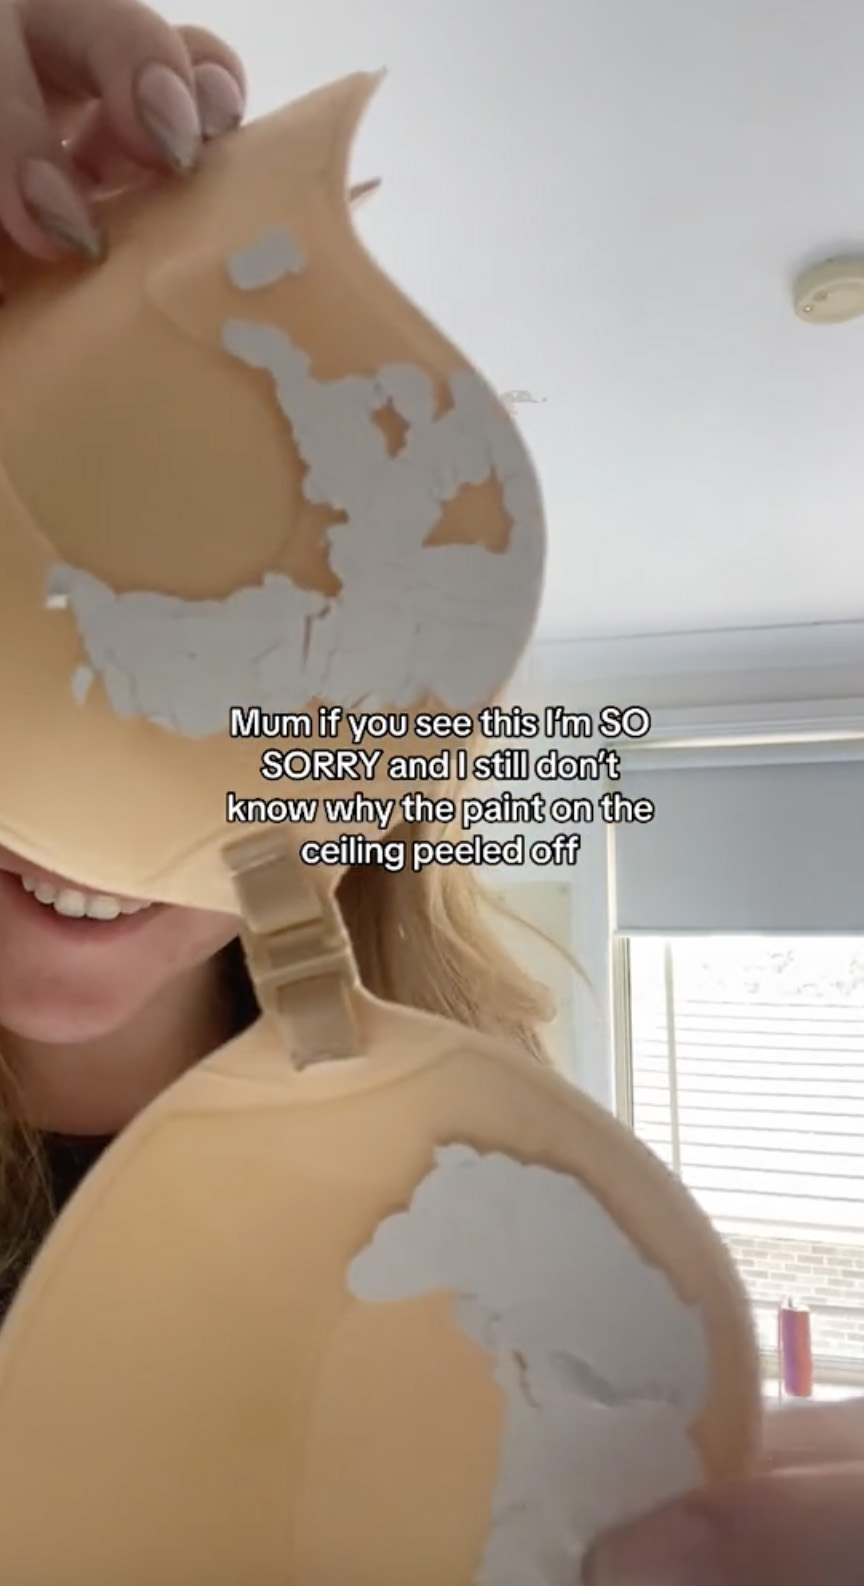 She apologized to her mom after the bra removed layers of paint off her ceiling